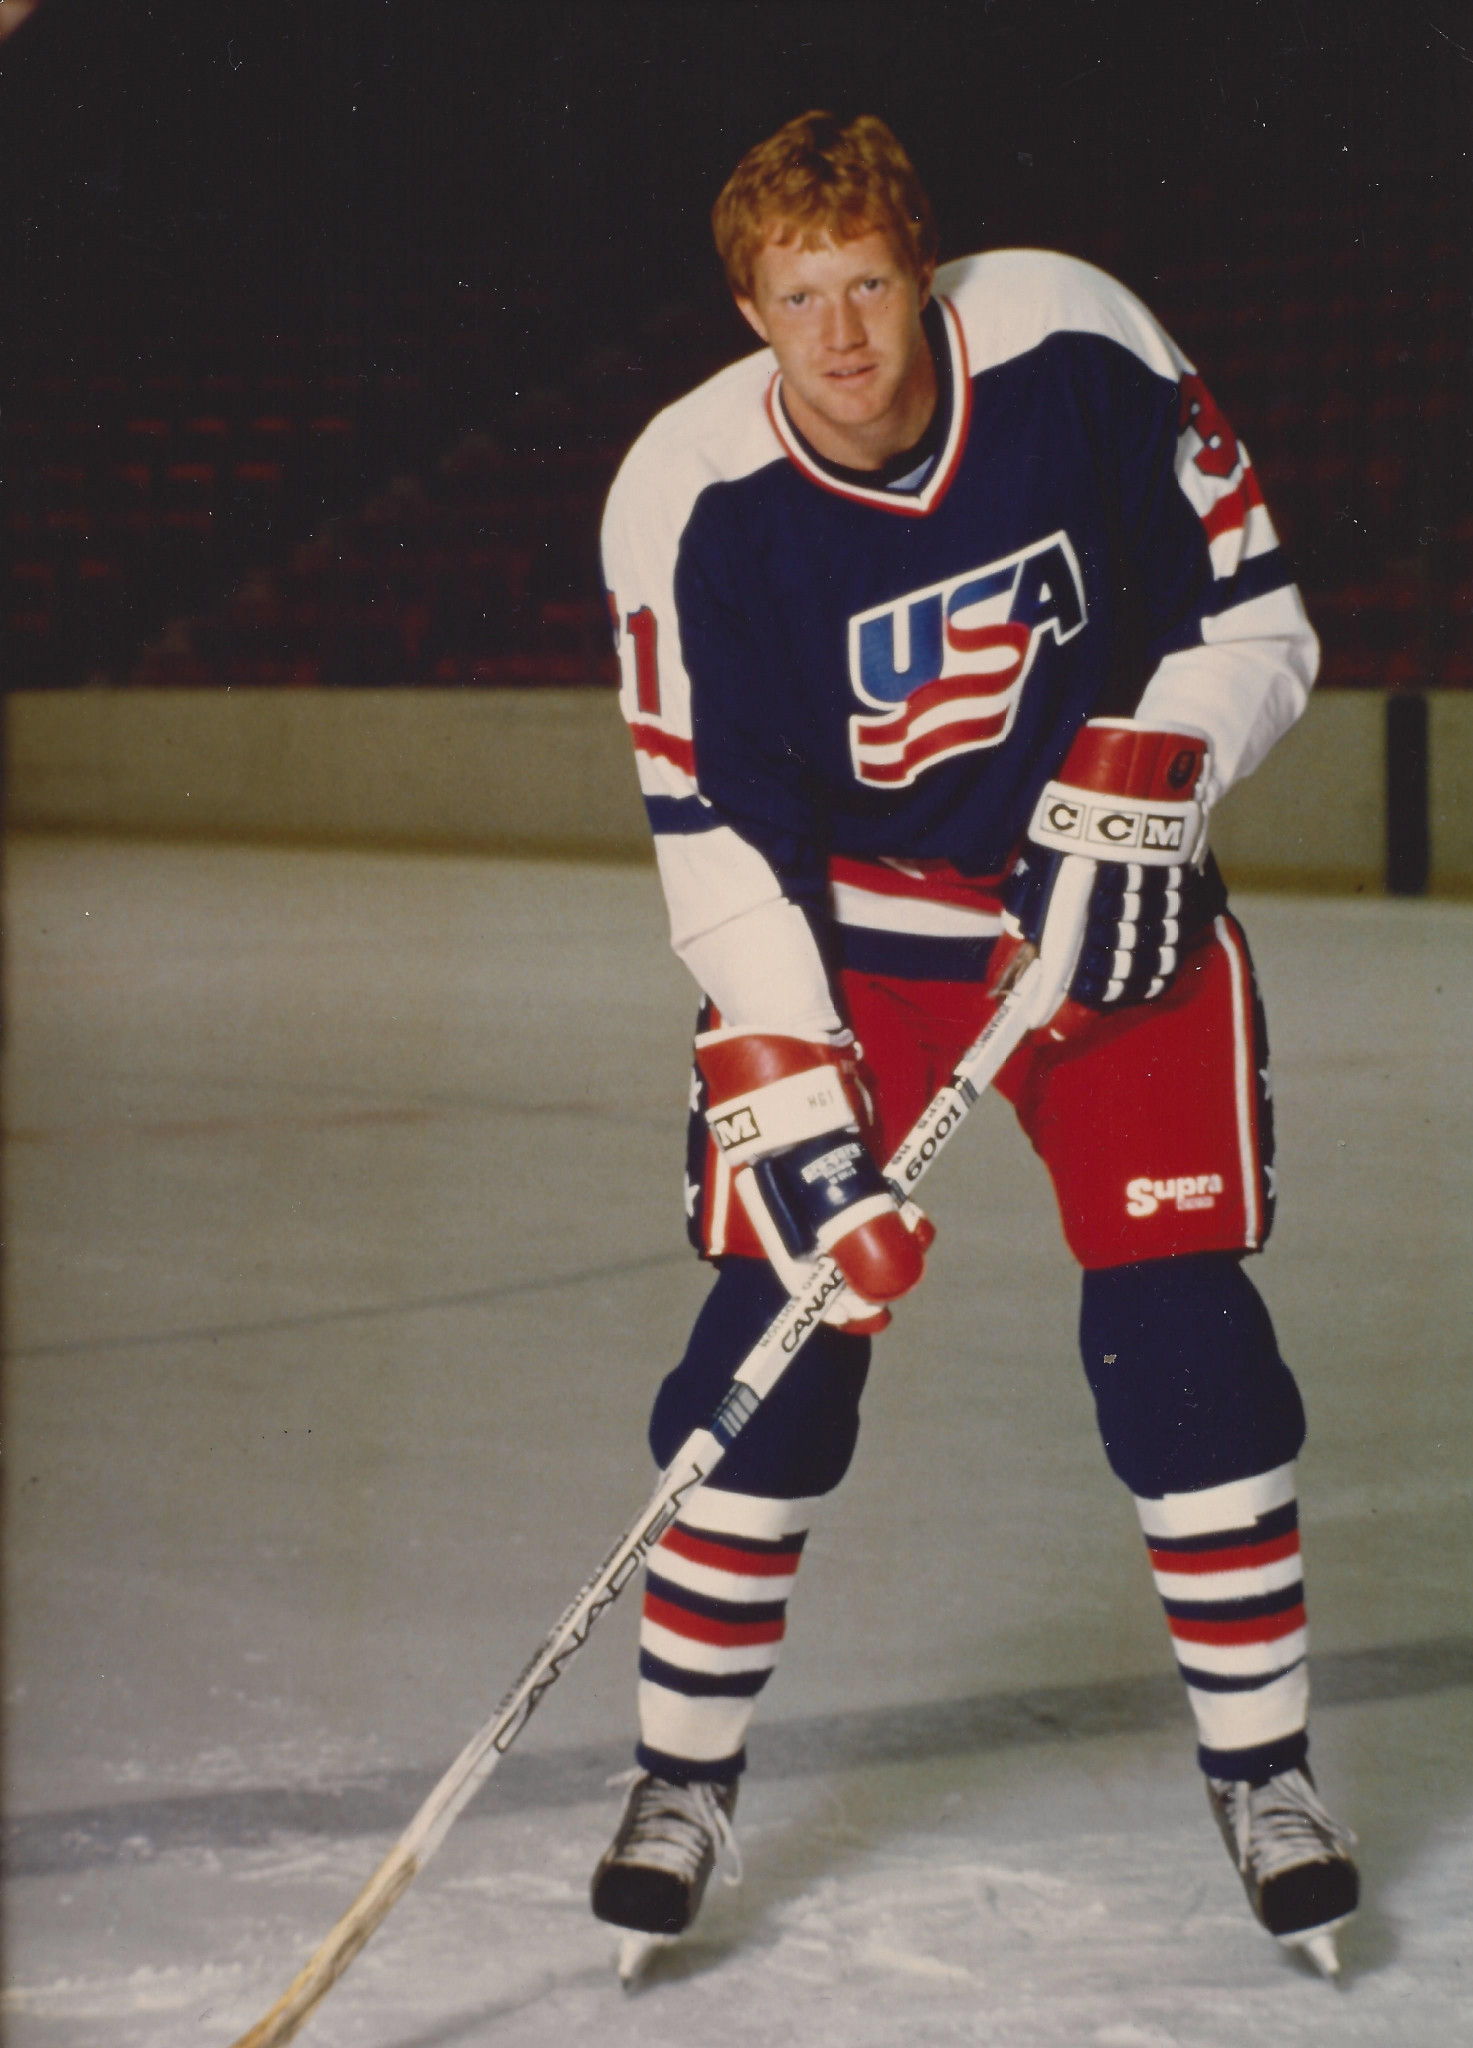 Jim Johannson had represented America at the 1988 and 1992 Winter Olympic Games in Calgary and Albertville ©Twitter